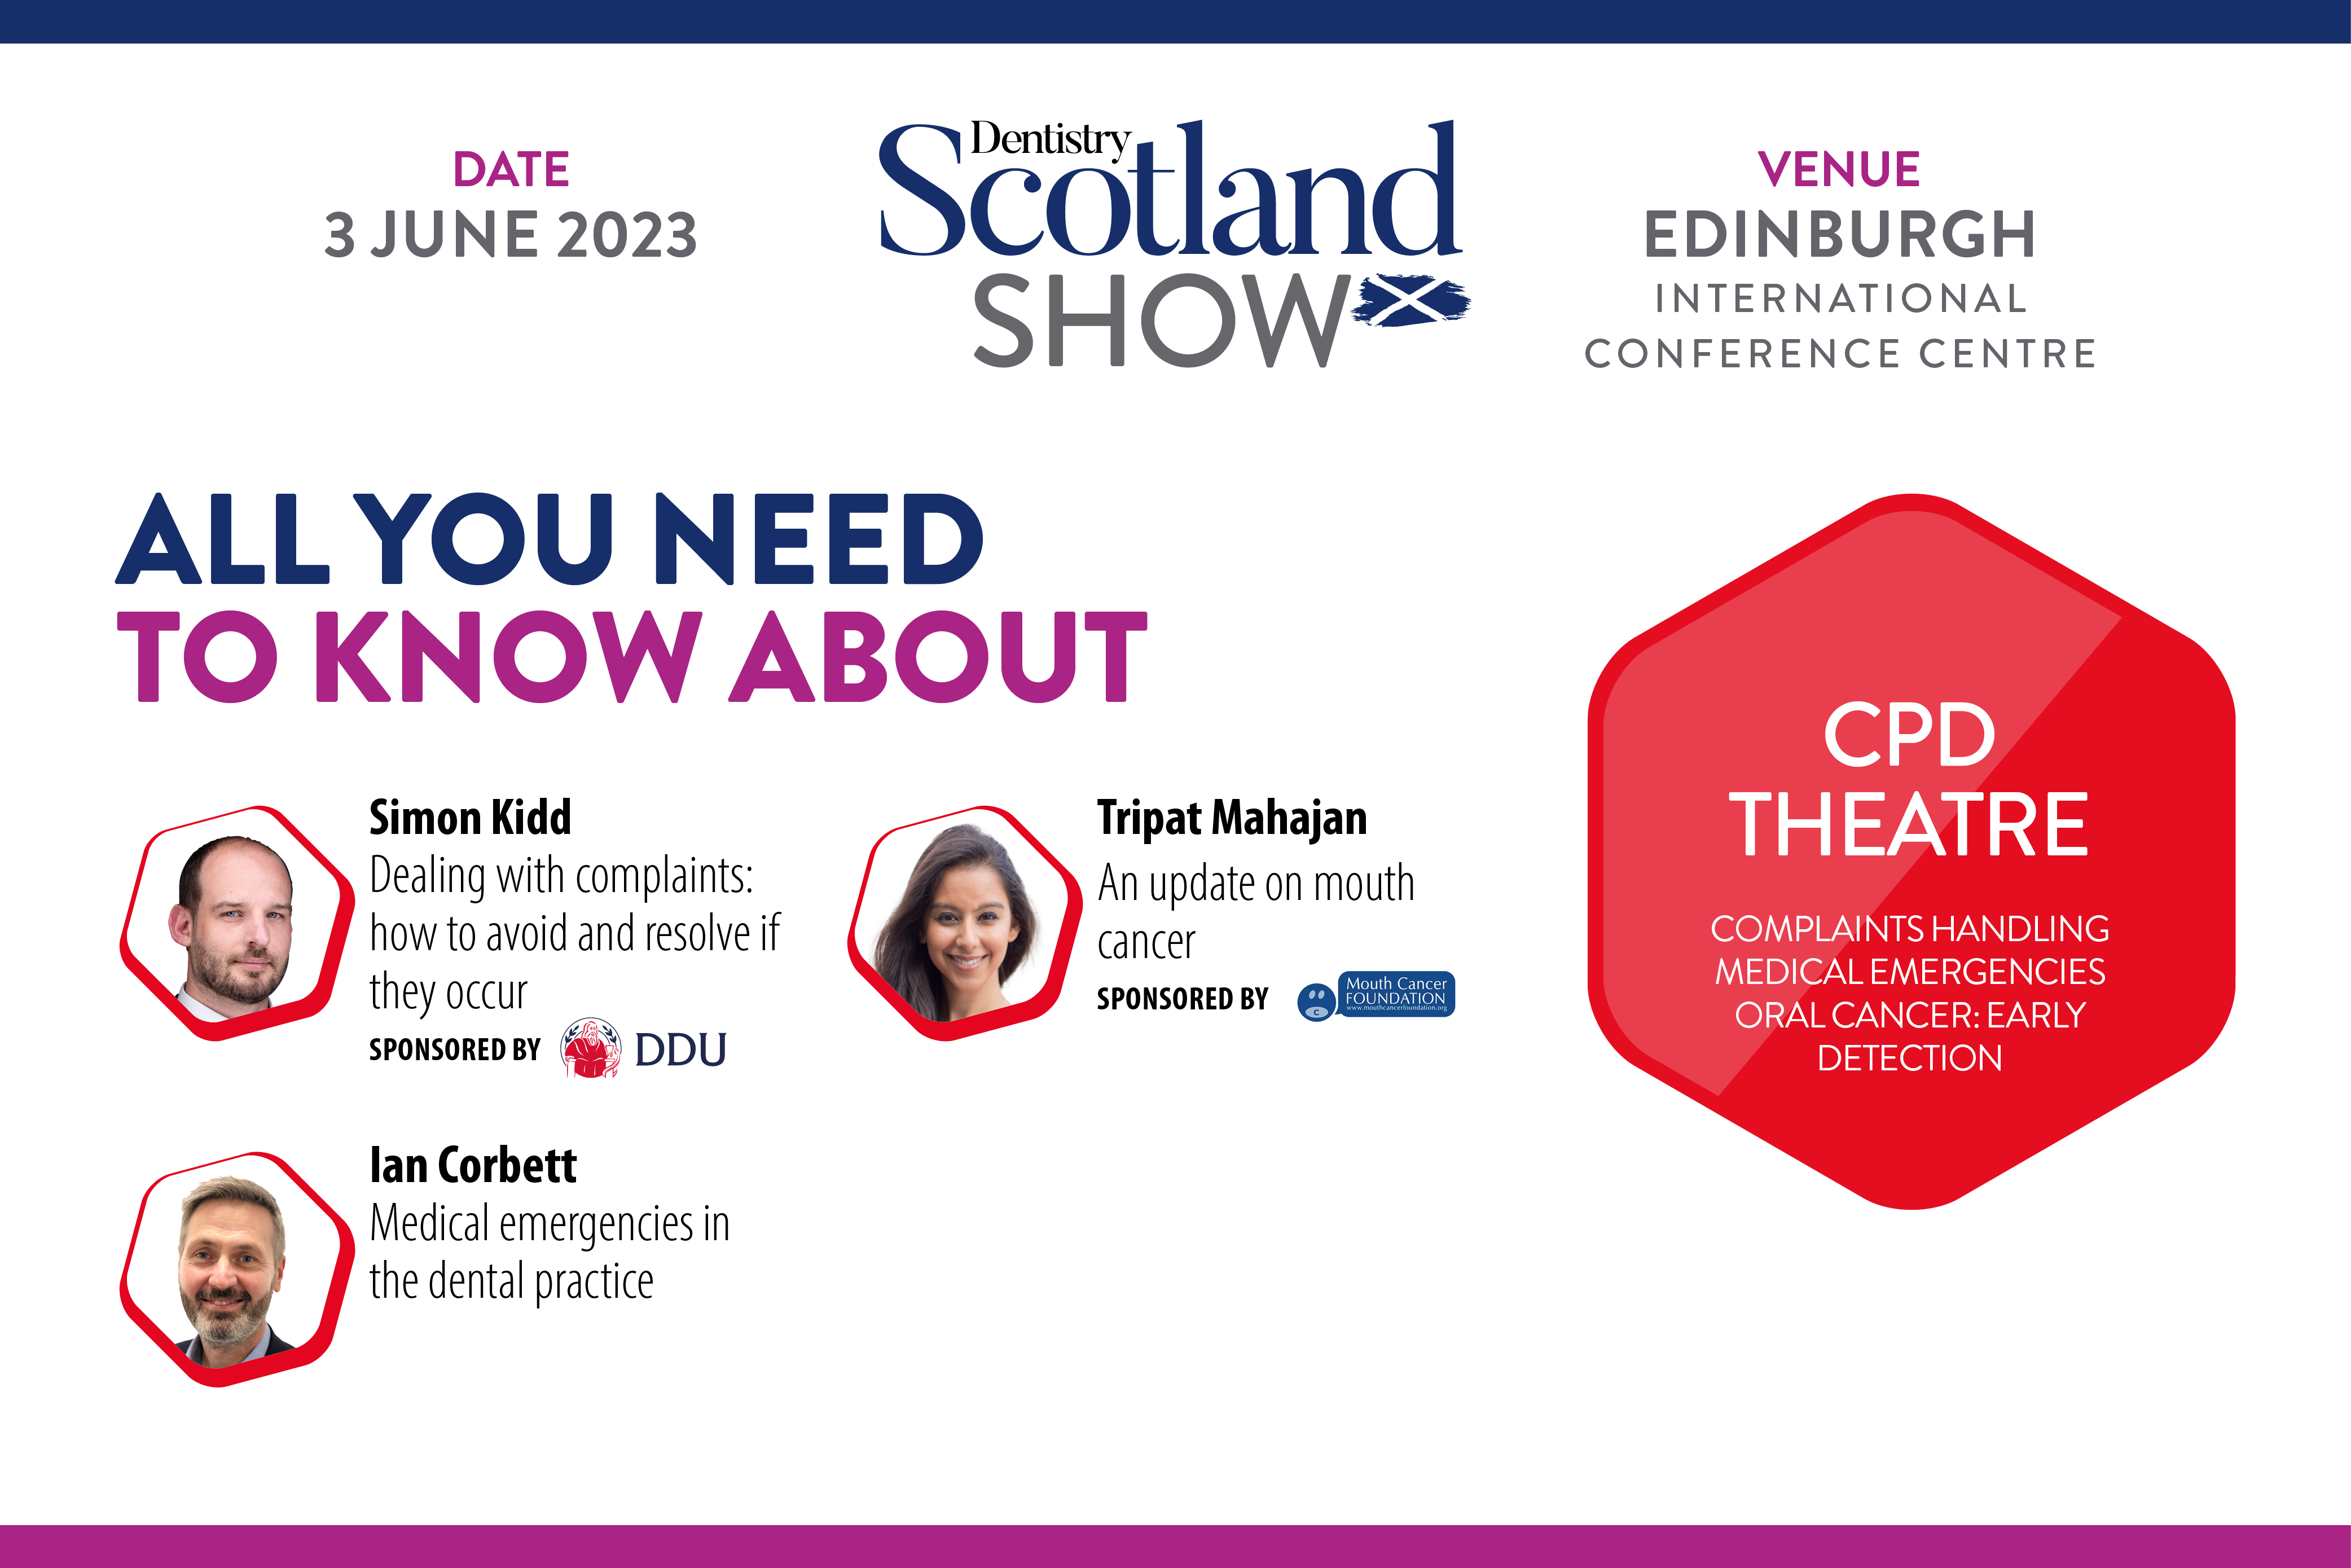 For the first time, this year's Dentistry Scotland Show will have a theatre dedicated to GDC recommended CPD topics – find out what it will have in store.